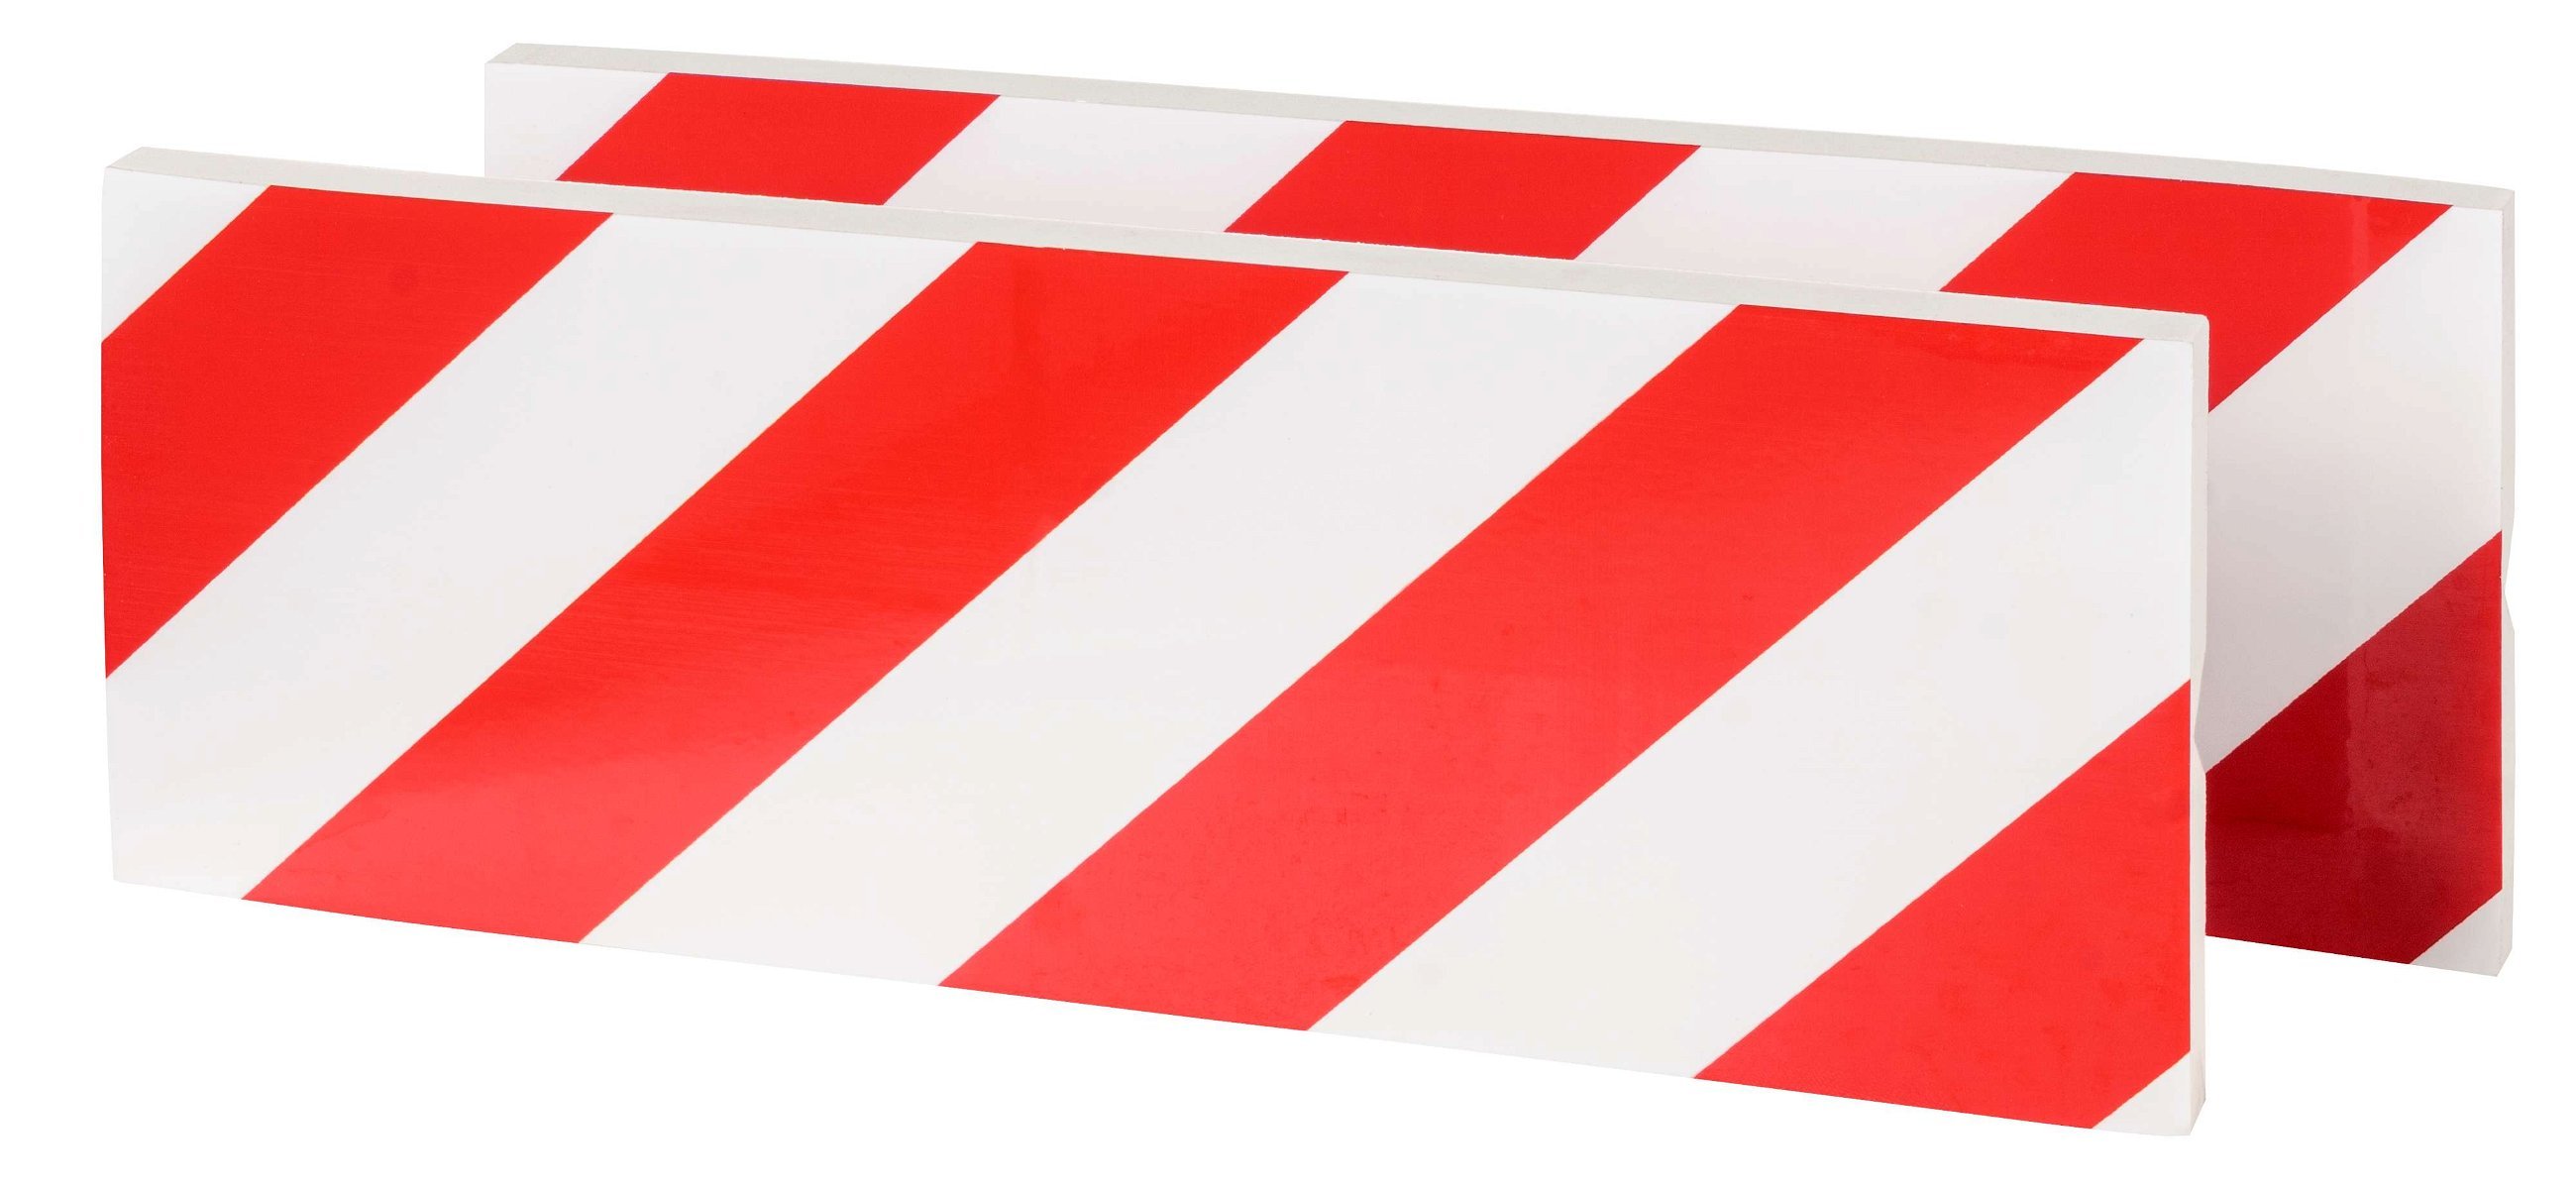 Garage wall protection, 2 pieces Car door edge protection self-adhesive 40x15x1,5 cm red/white